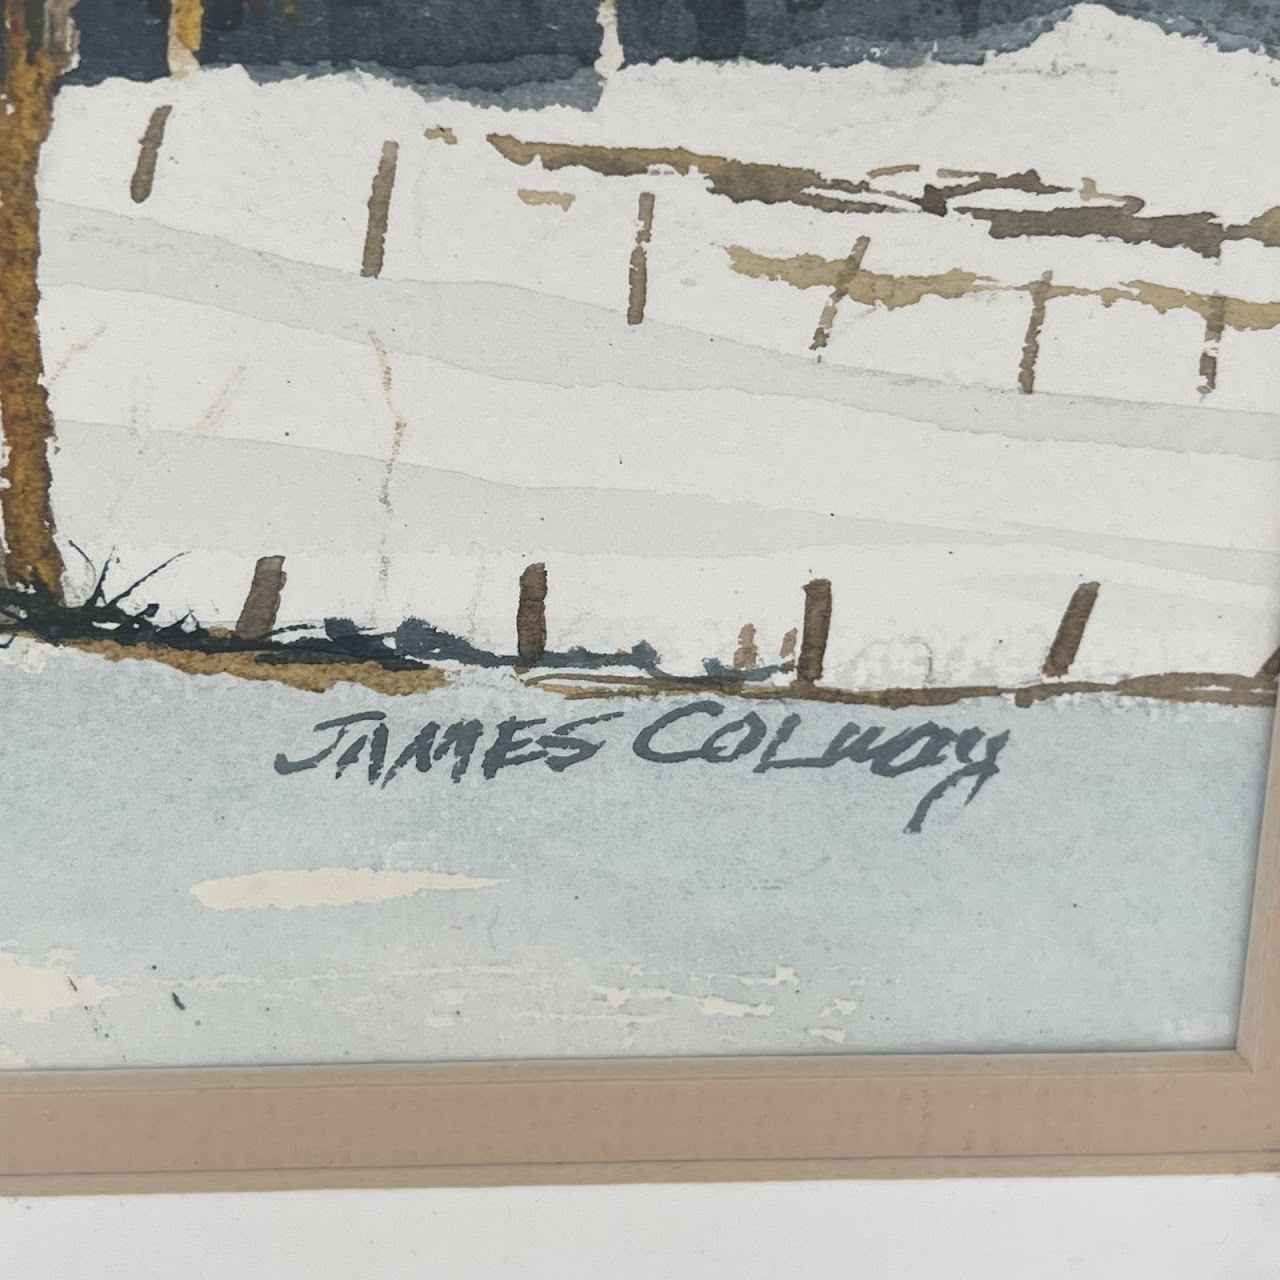 James Colway Signed Watercolor Landscape Painting